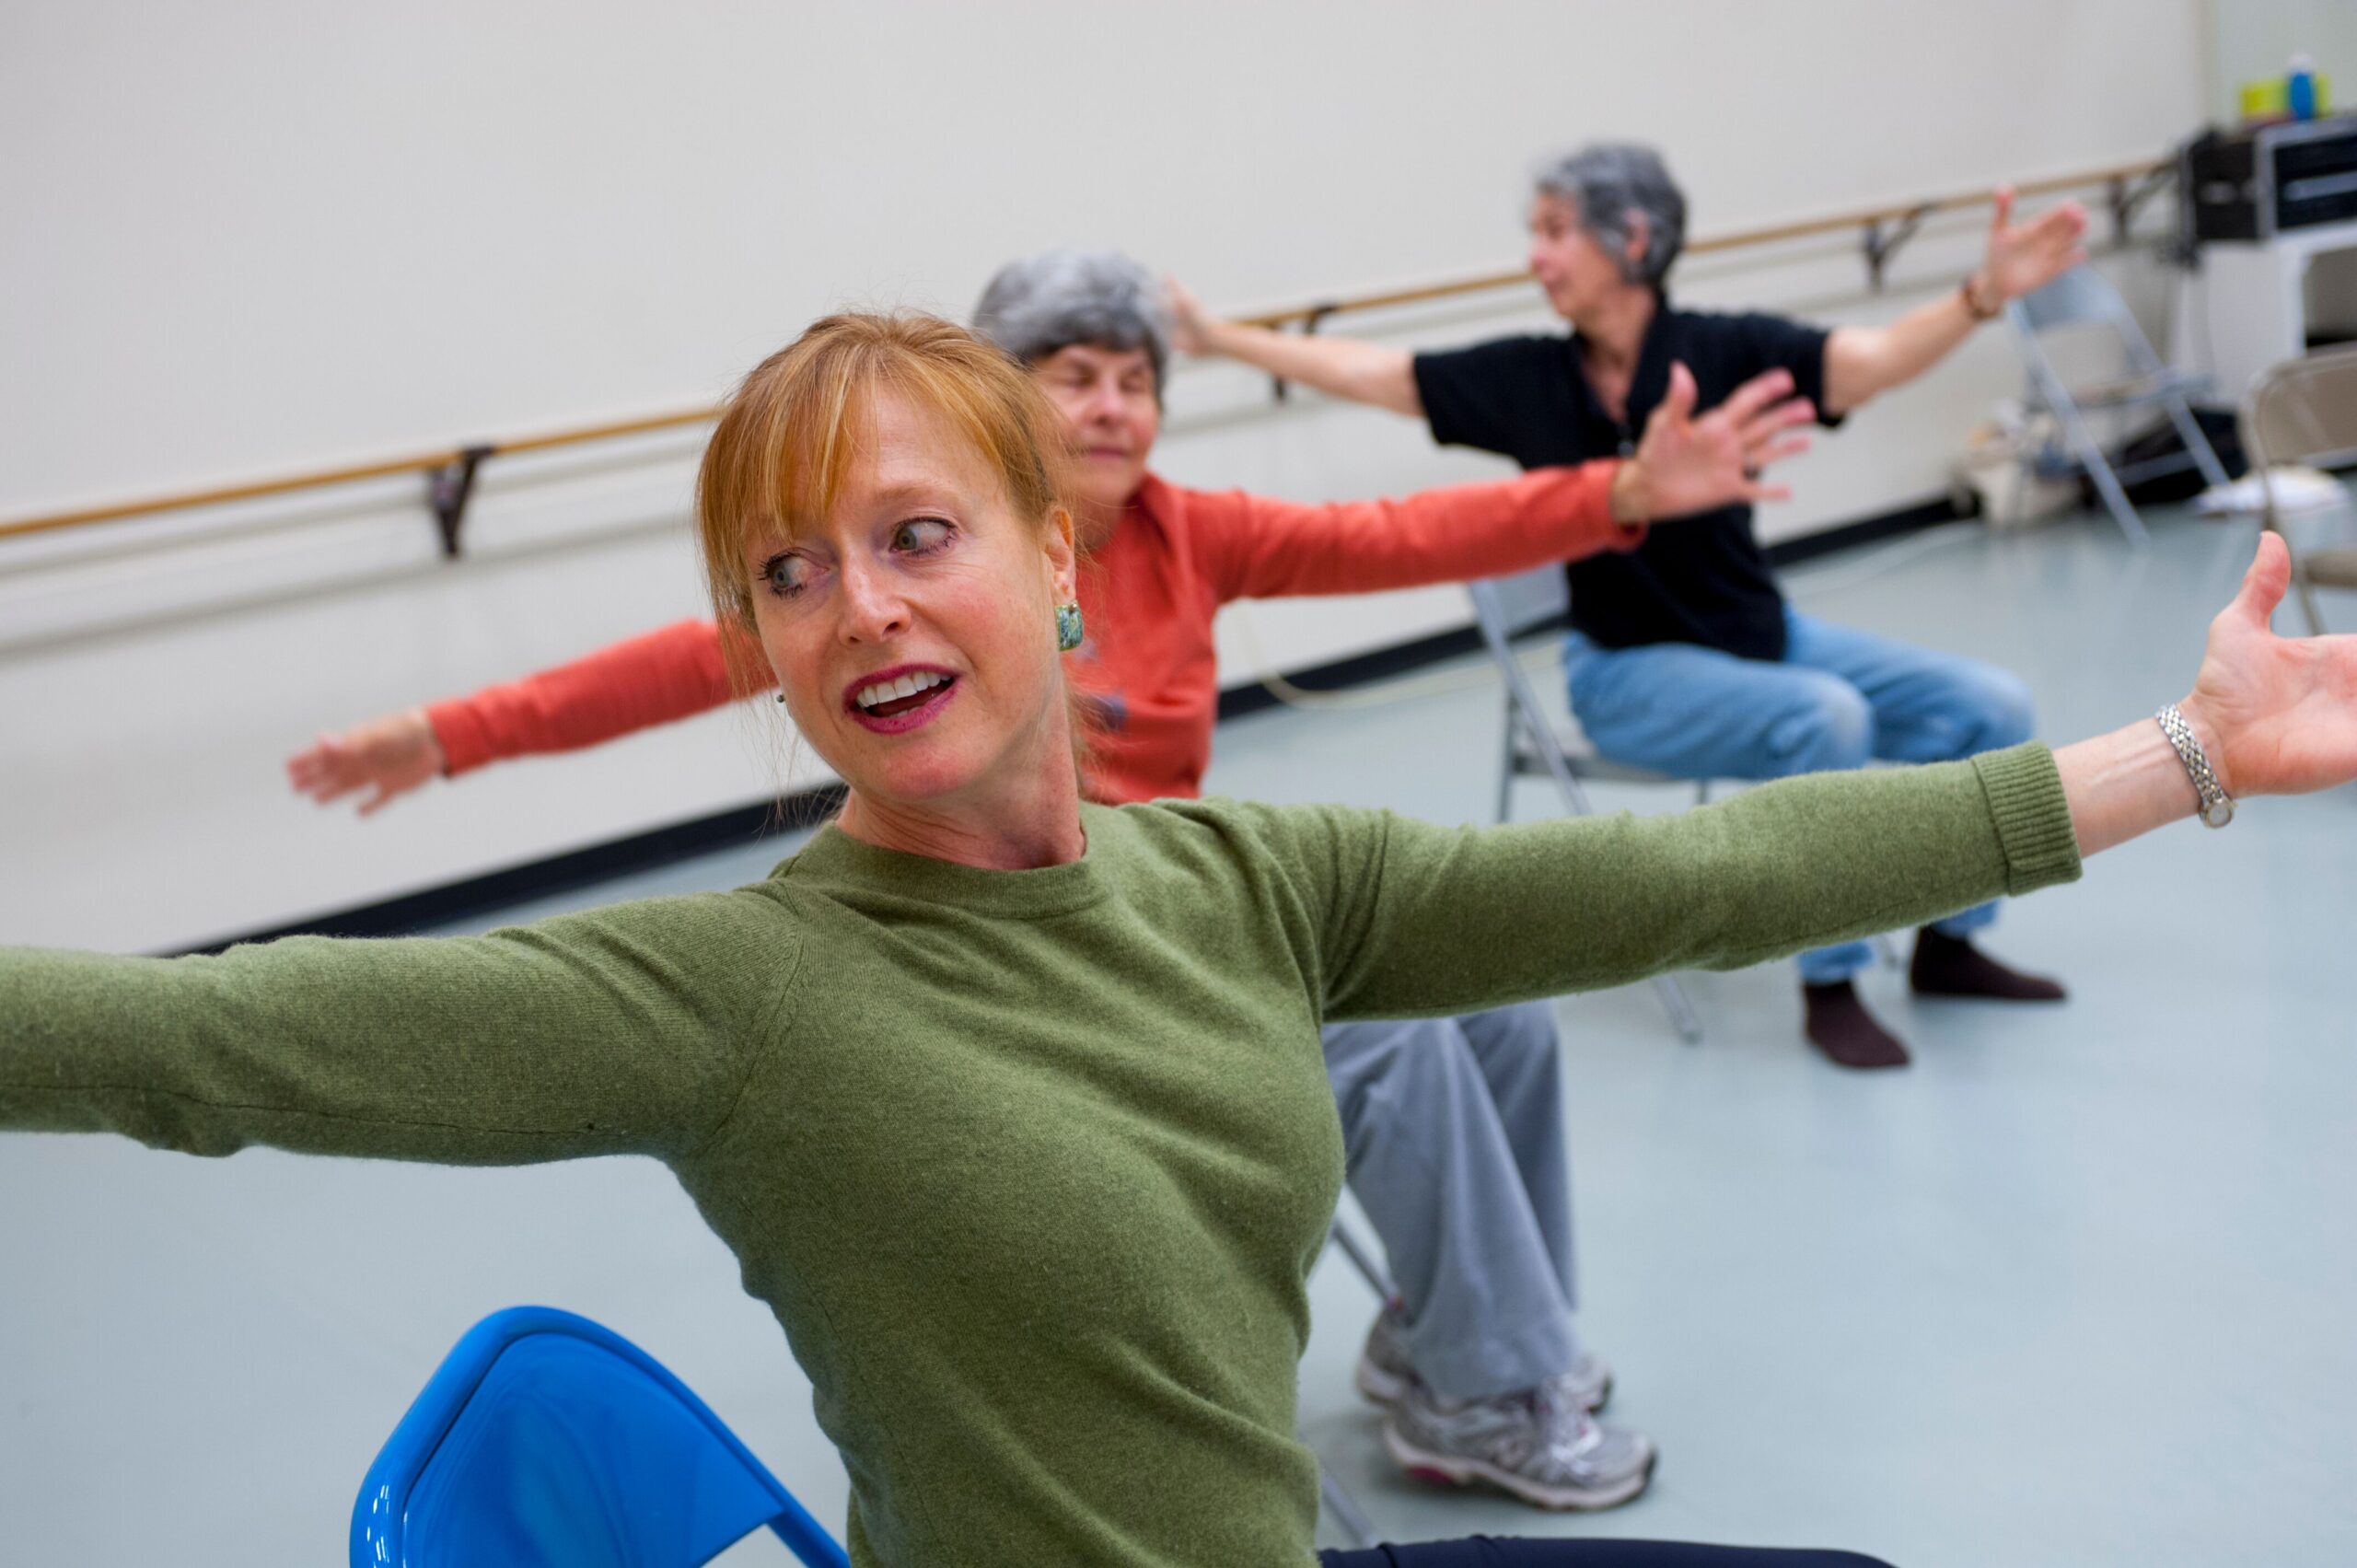 Dance teacher in green sweater leads a seated dance activity.